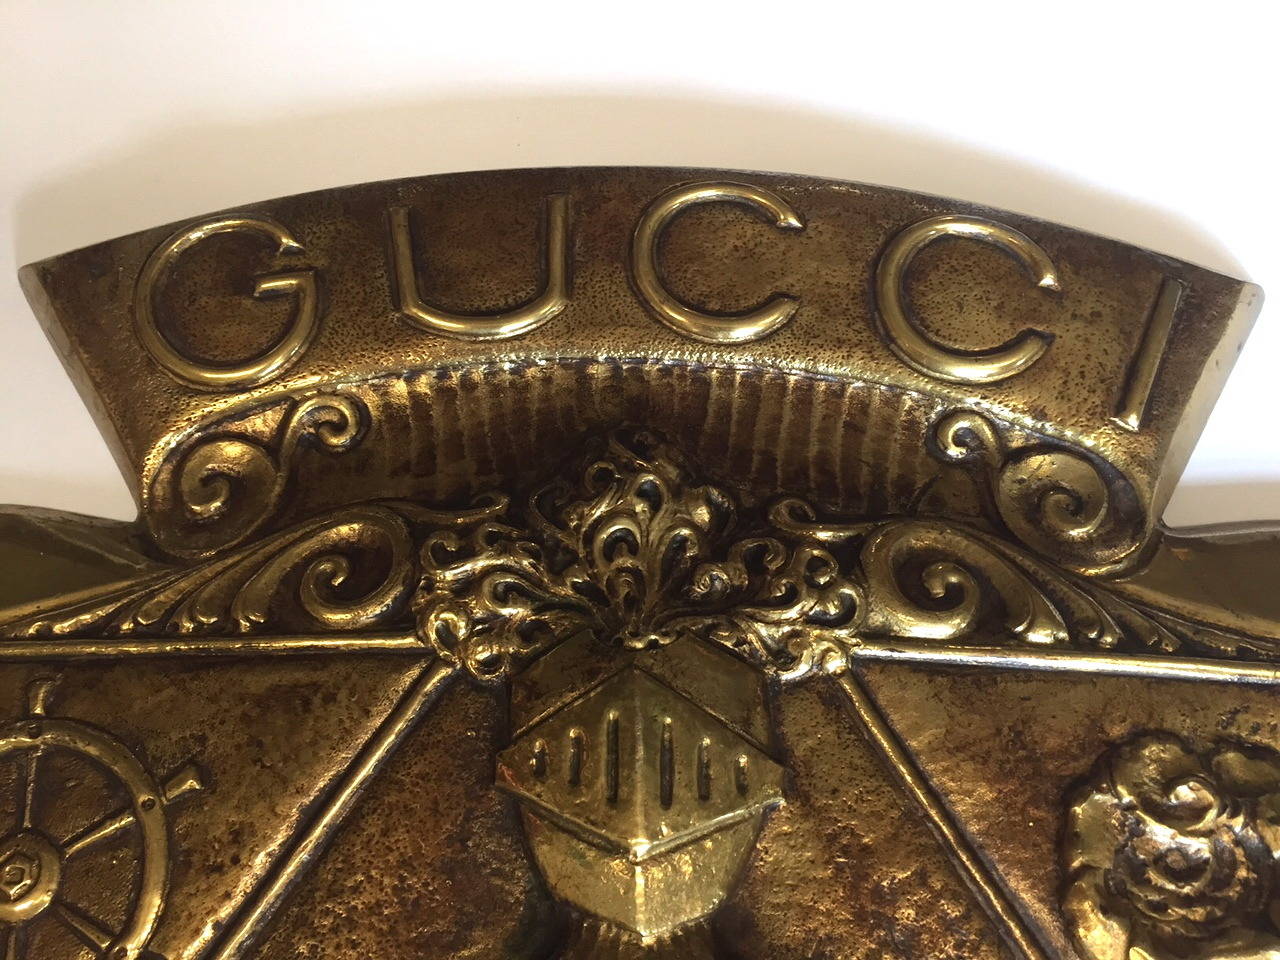 We think this chic bit of wall decor was a custom plaque that adorned a Gucci store at one time. Heavy solid and Gucci glamorous.
There are two threaded holes to allow for hanging.